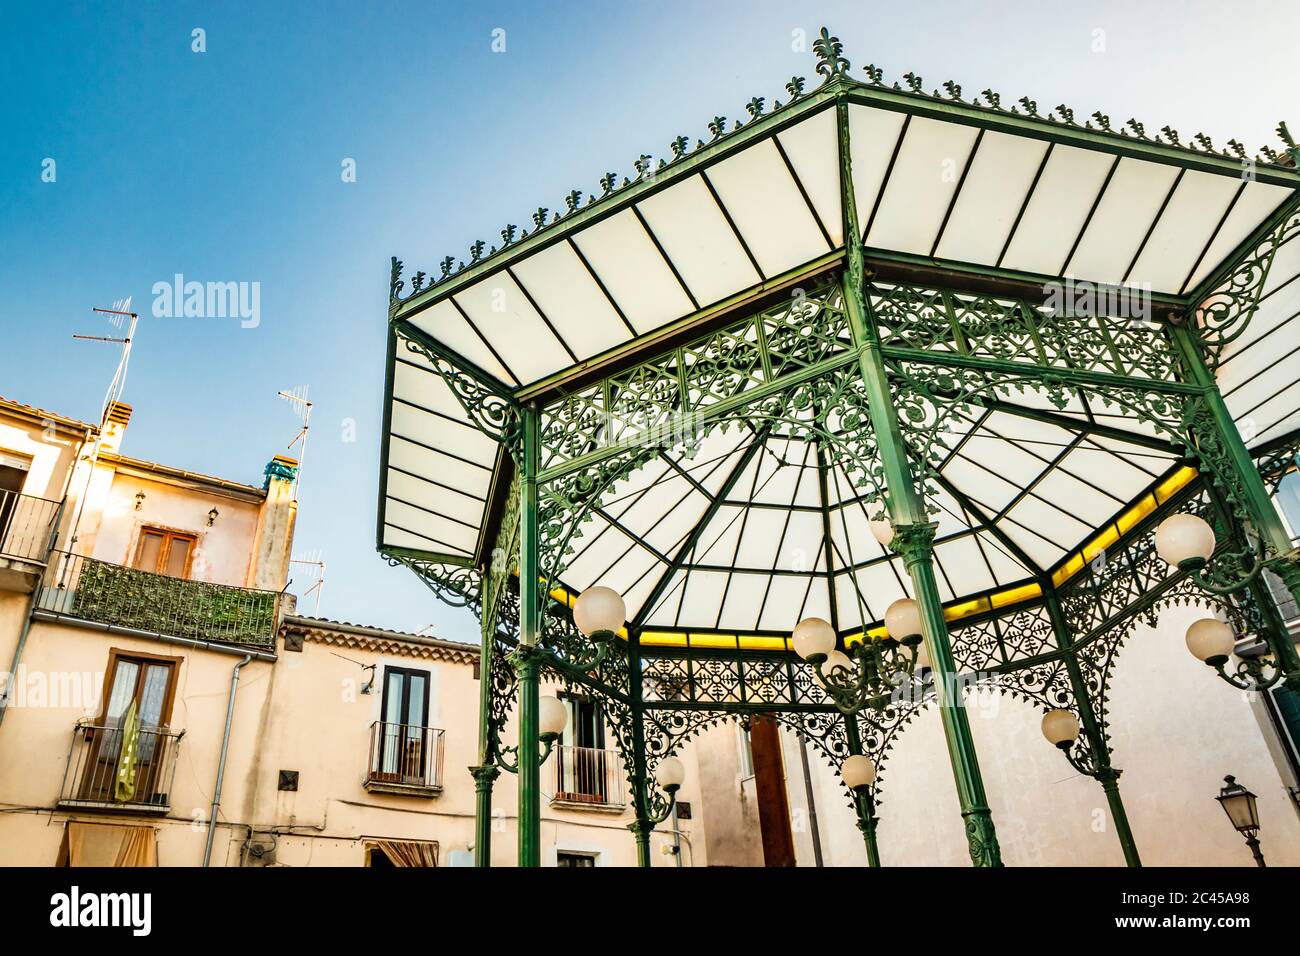 October 27, 2019 - Isernia, Molise, Italy - The Art Nouveau green wrought iron gazebo. The matt satined glass cover and floral decorations. The window Stock Photo